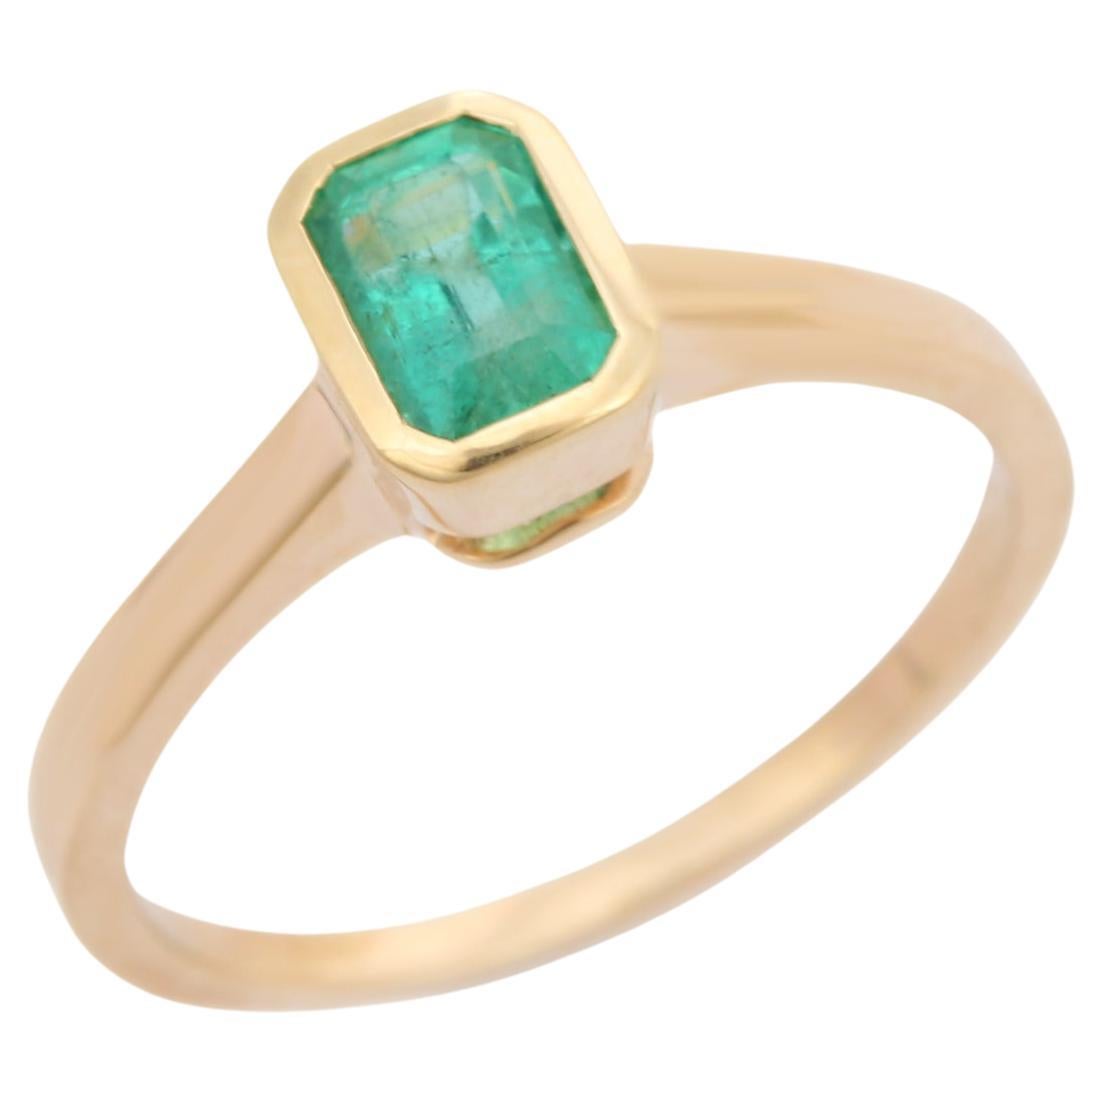 For Sale:  Handmade Bezel Set Emerald Single Stone Ring in 14k Solid Yellow Gold